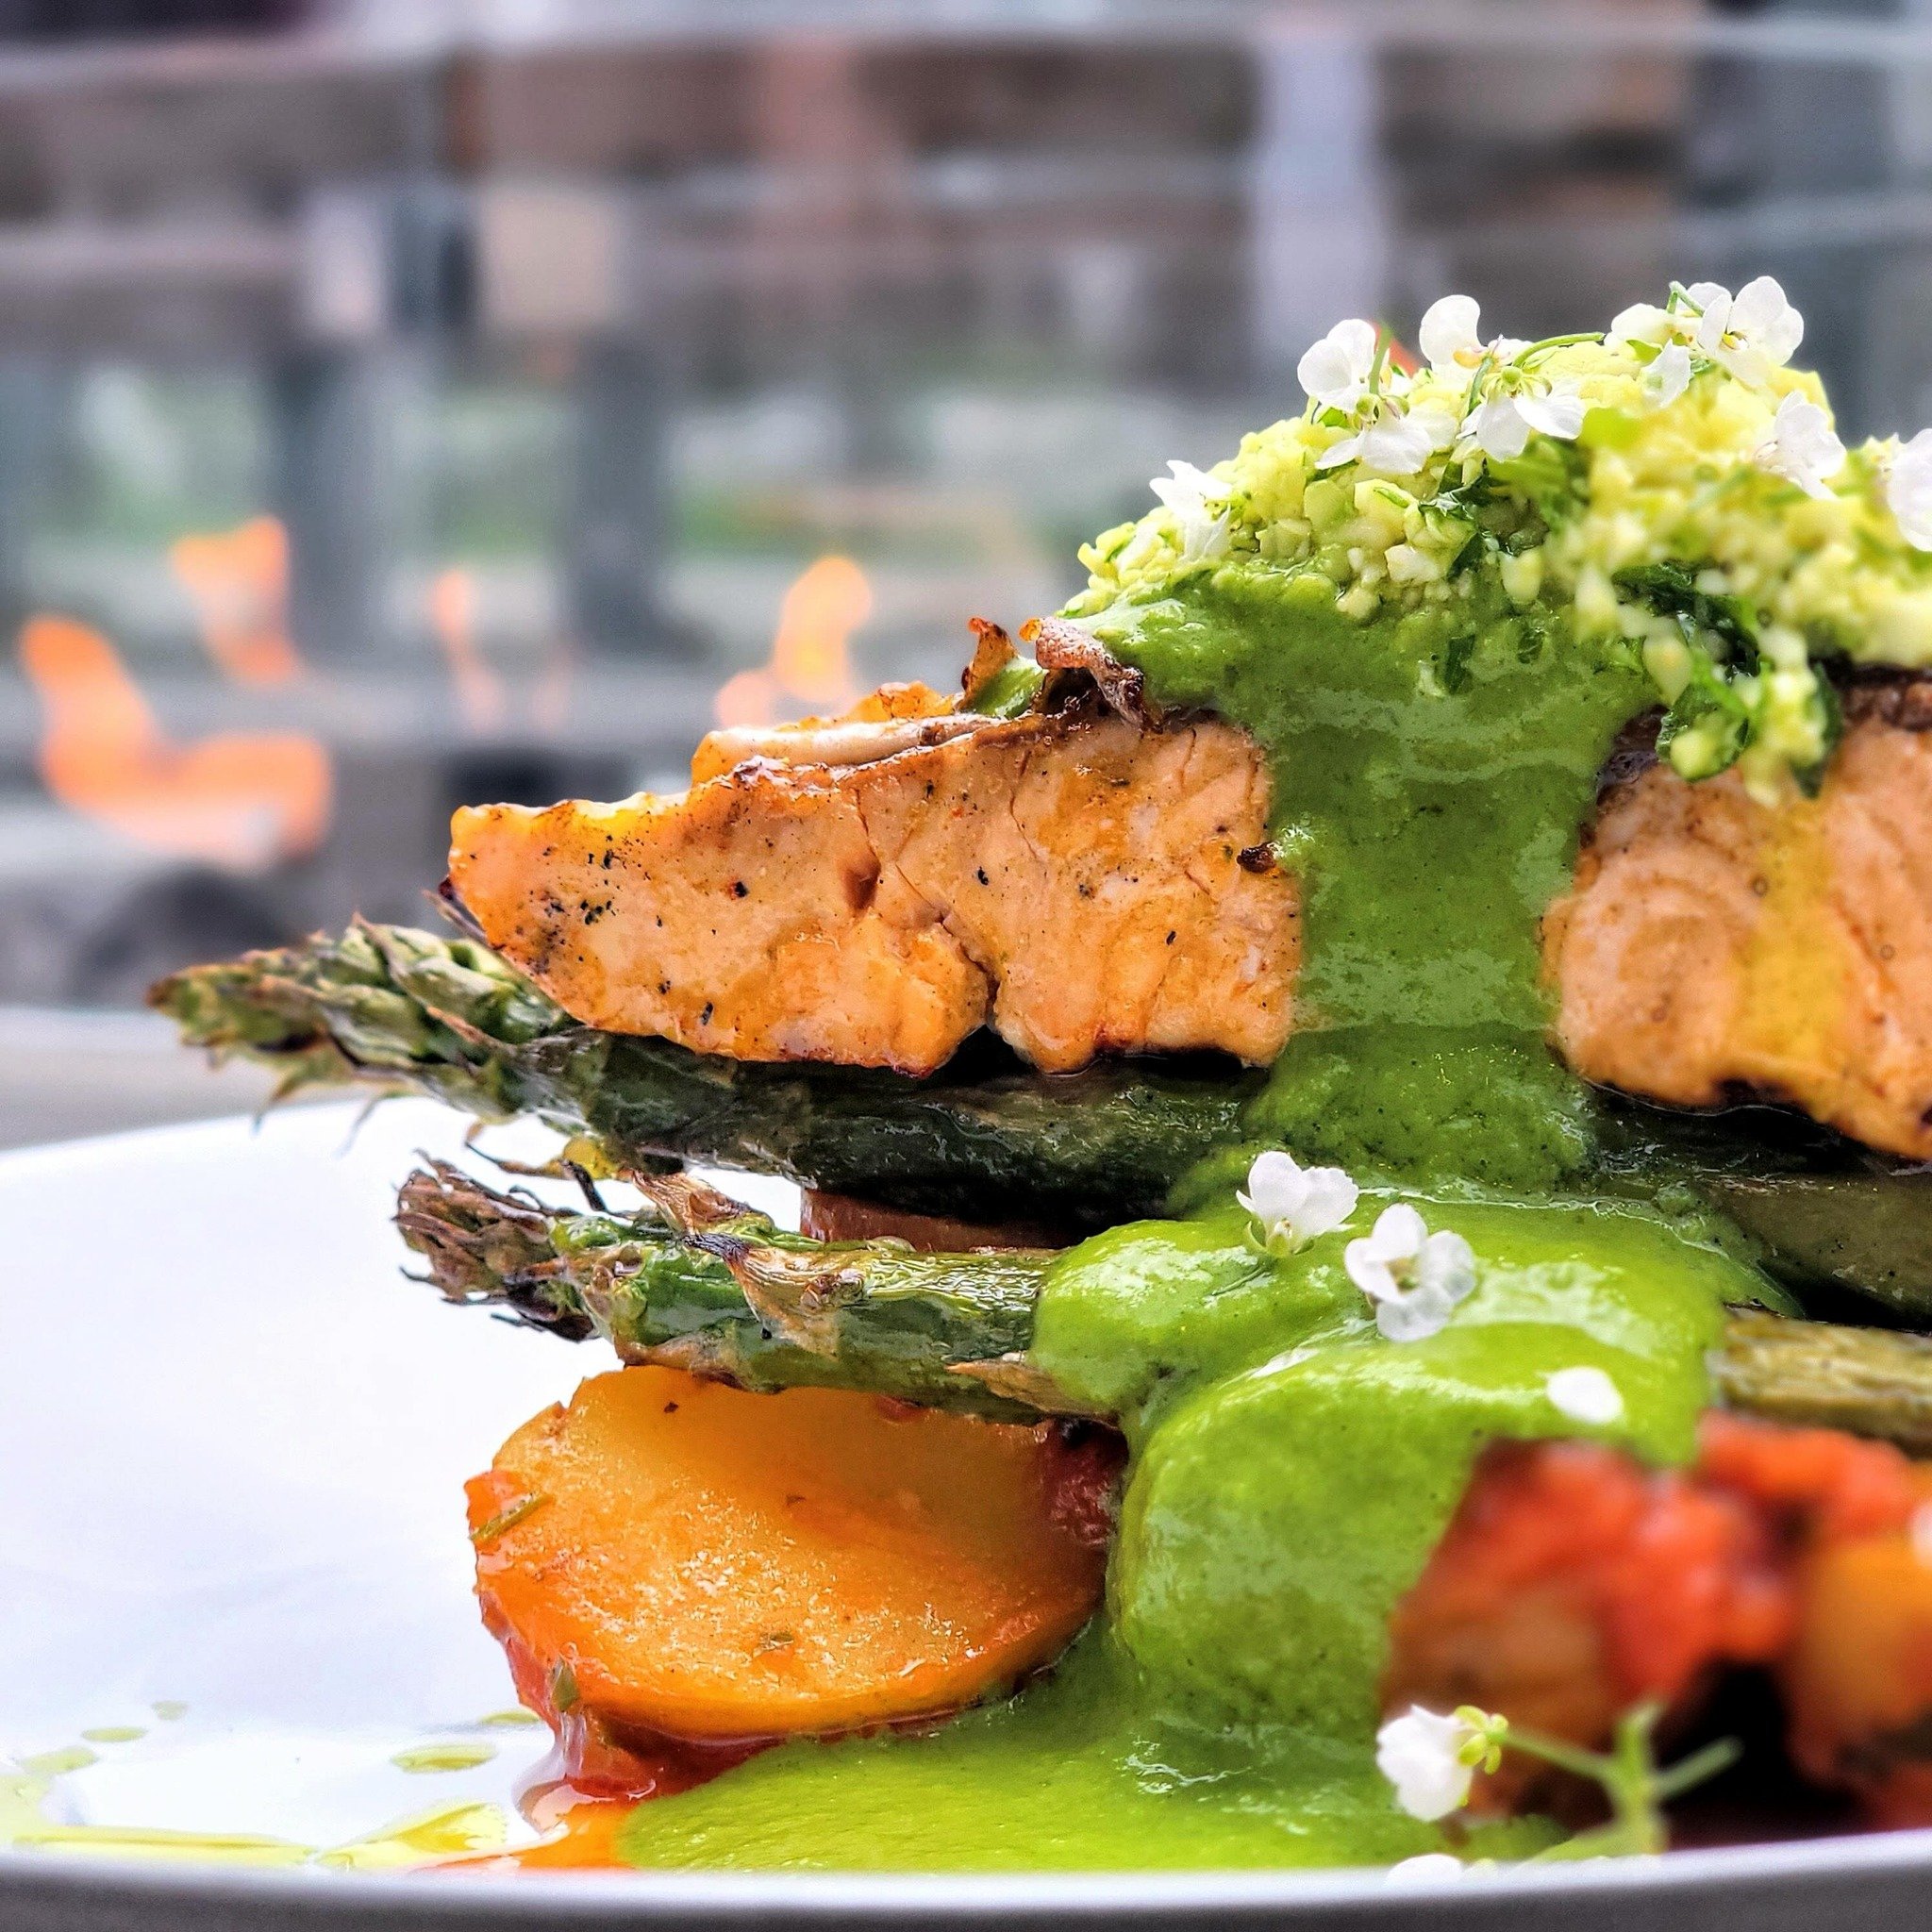 Our new salmon dish is a blast of spring flavors. Rosemary roasted potatoes, grilled asparagus, French arugula salsa verde, cauliflower-olive relish and turmeric oil combine to make the perfect combination of rich tantalizing flavors. 

#foundryandlu